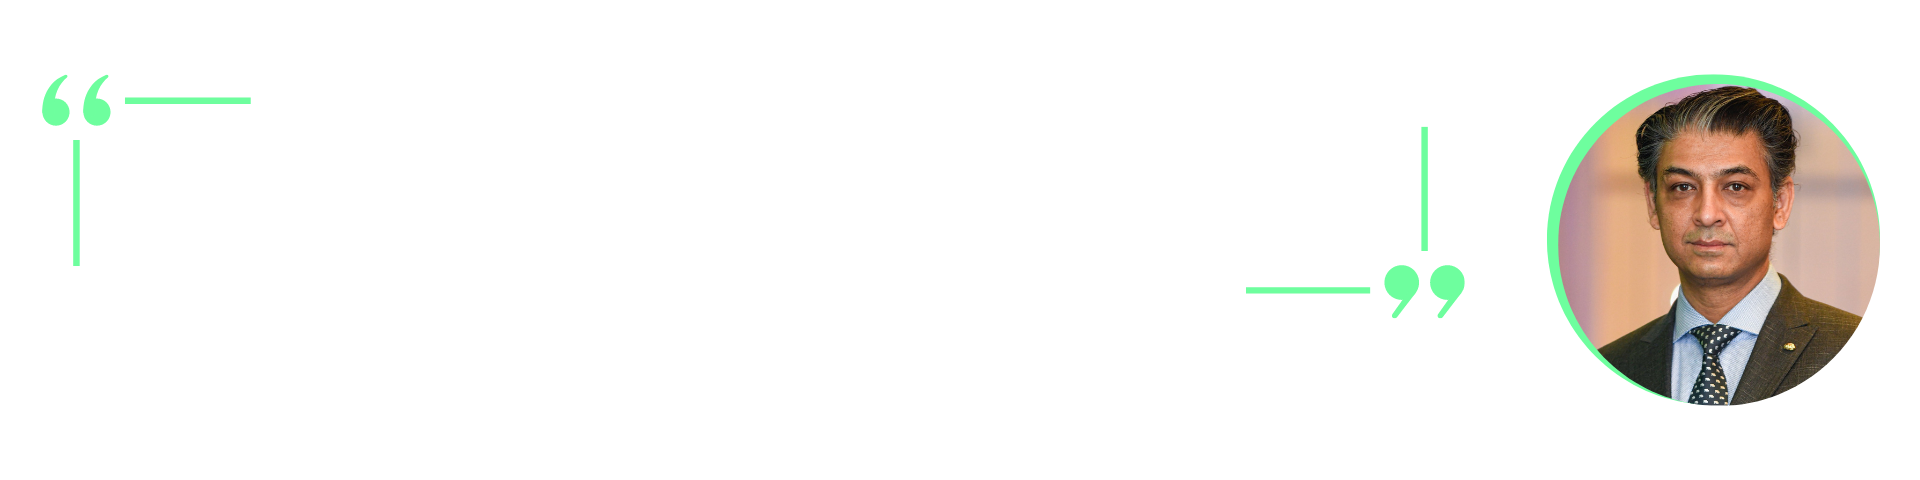 Doctor Siddiqui's quotation : "Unless i had no good solution for reconstruction. I would not deconstruct in a young patient."